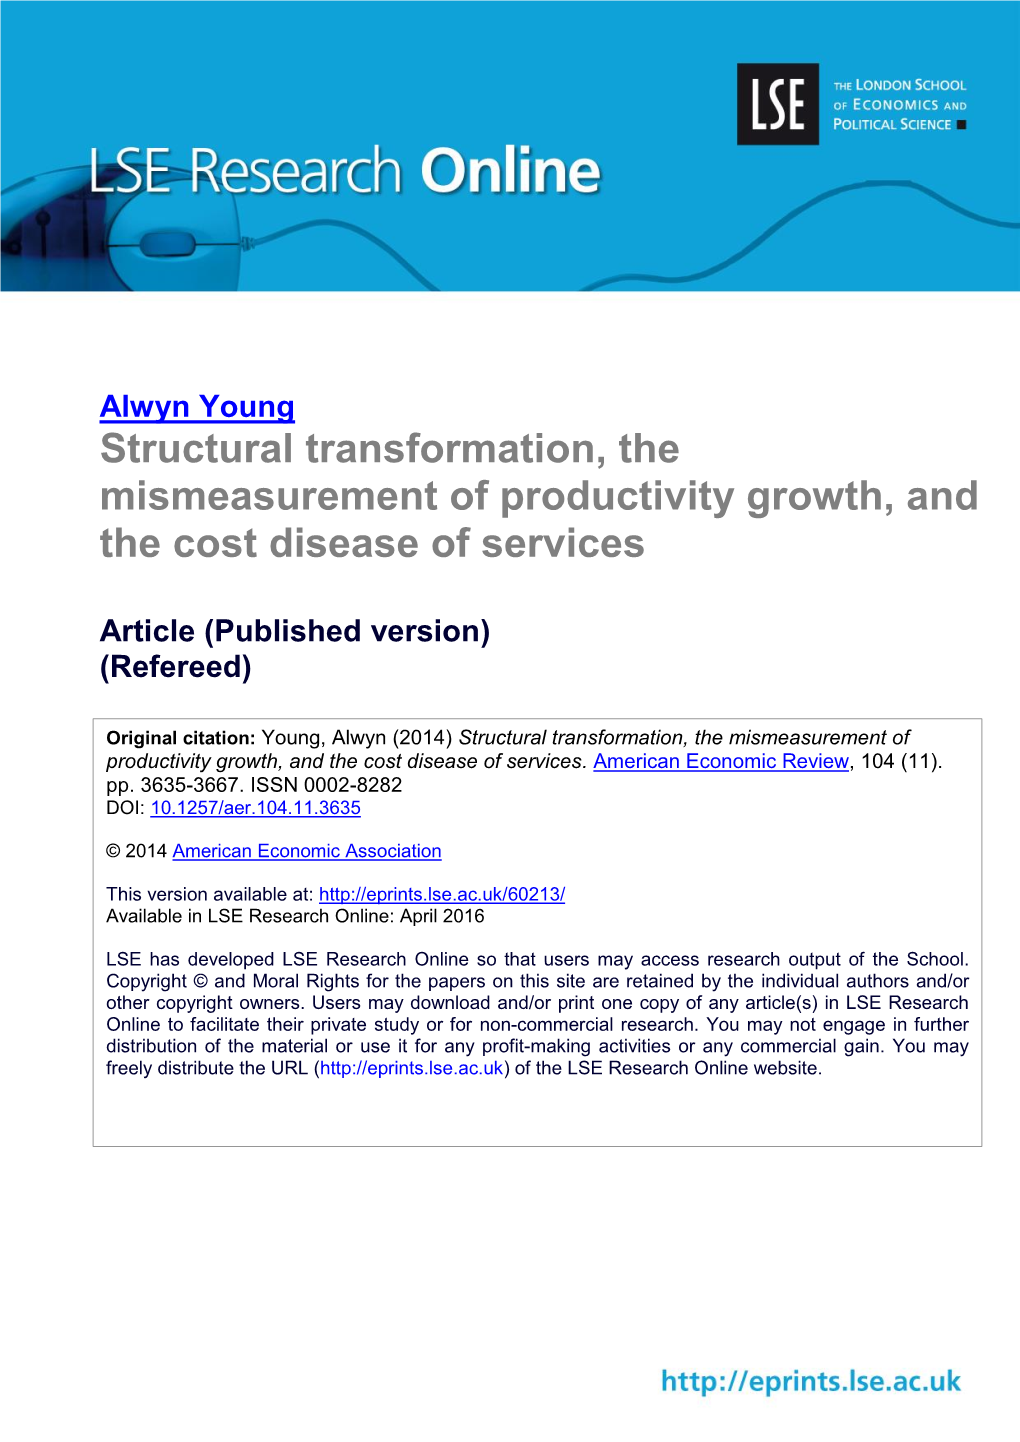 Structural Transformation, the Mismeasurement of Productivity Growth, and the Cost Disease of Services